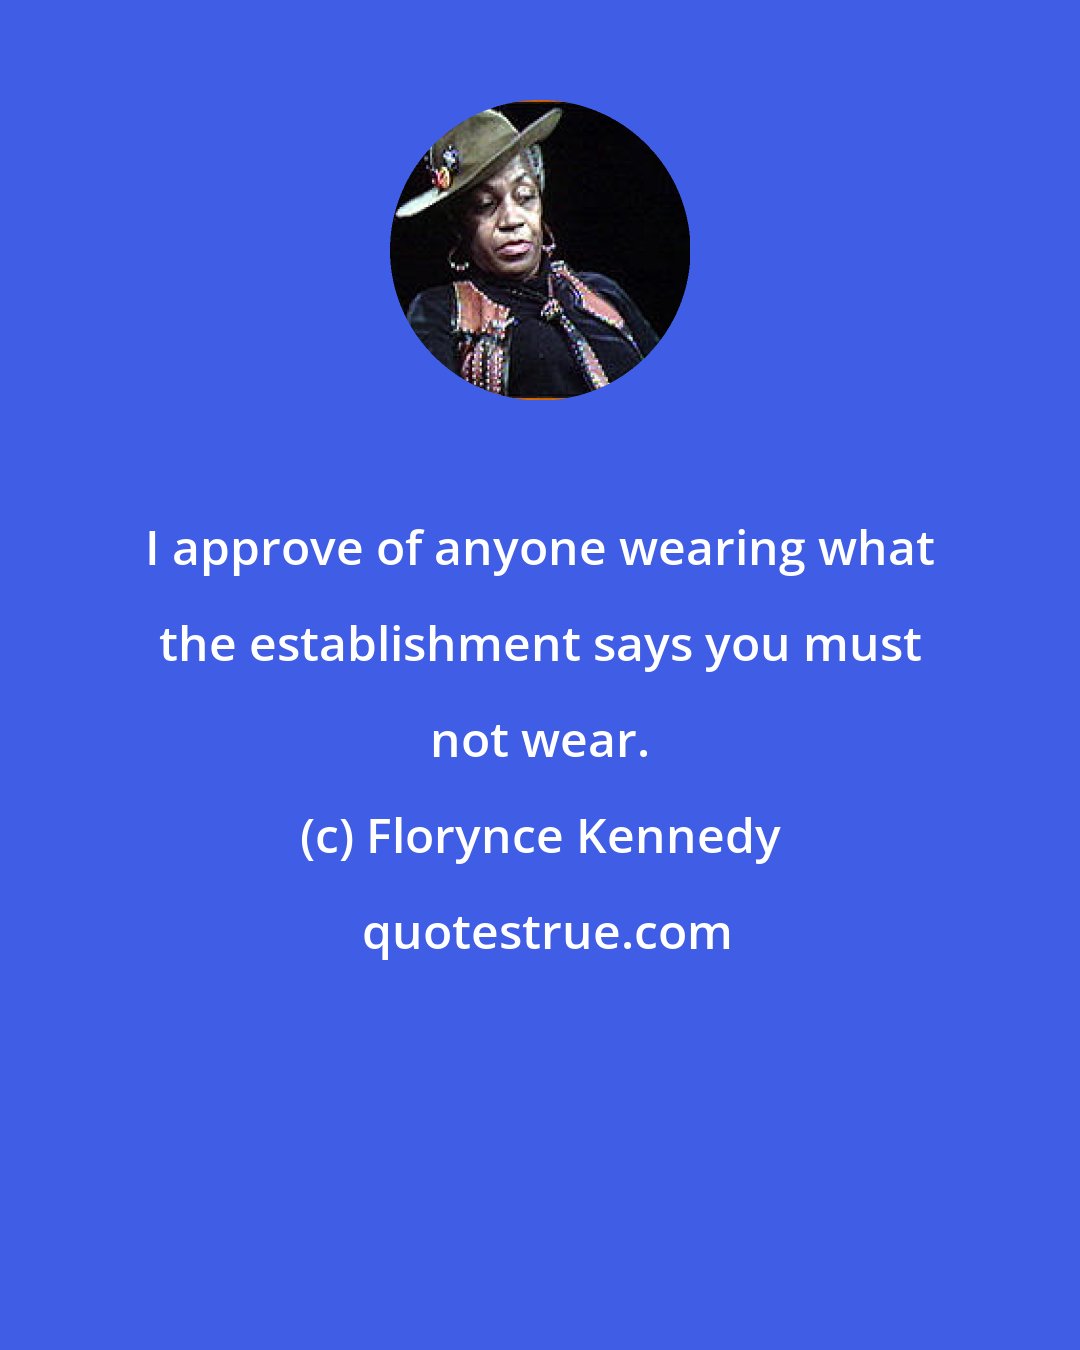 Florynce Kennedy: I approve of anyone wearing what the establishment says you must not wear.